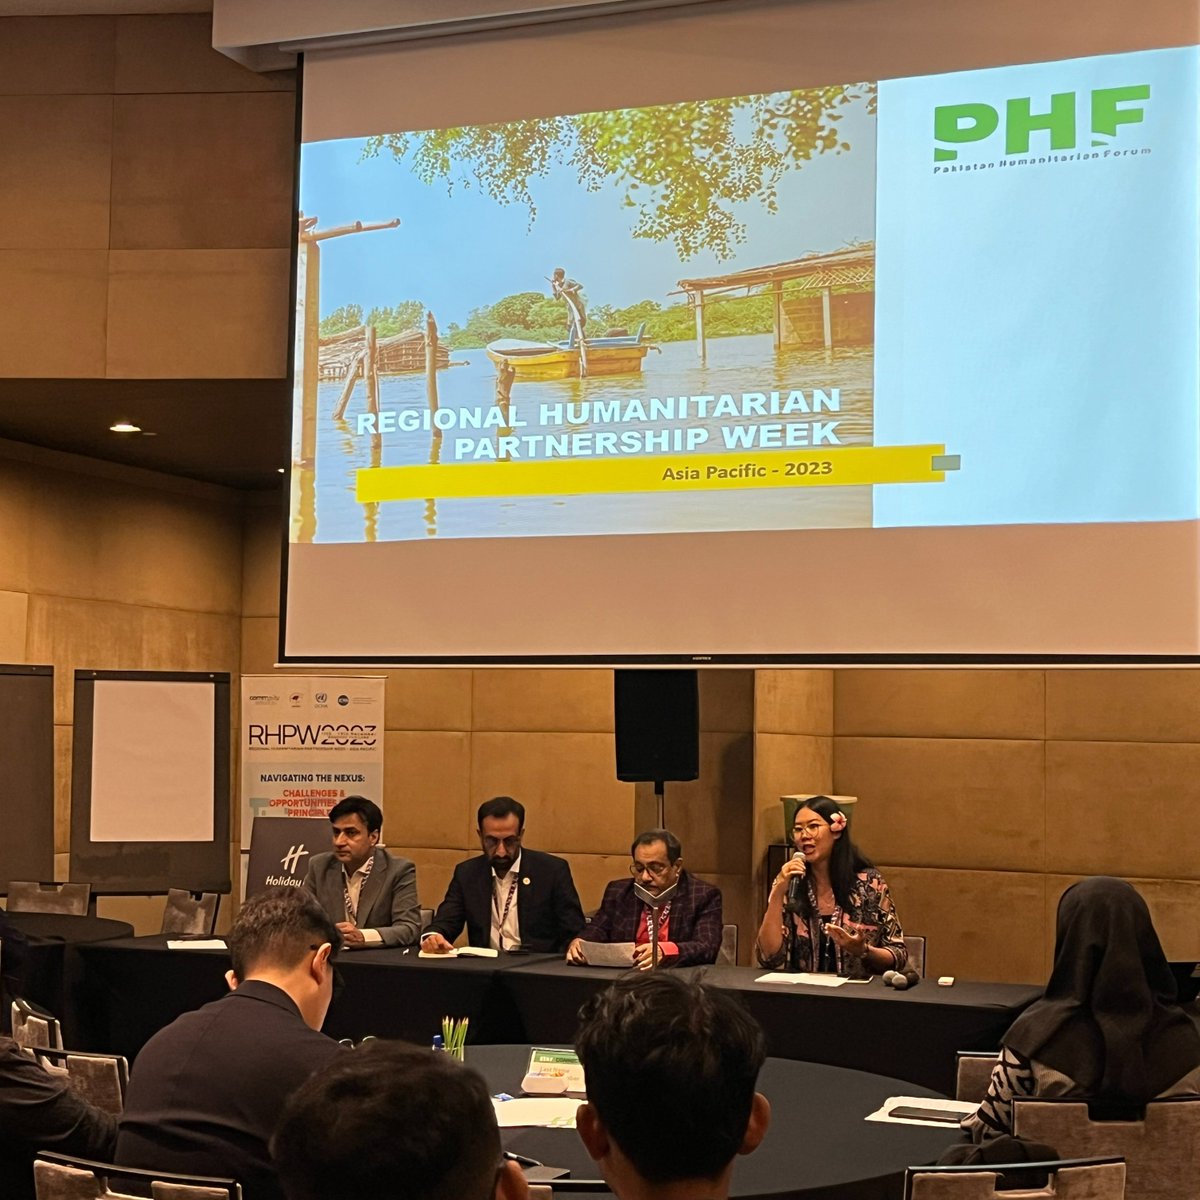 Welcome to #RHPW2023 Session #15 by PHF on 'Climate Actions for Humanitarian Outcomes', speakers from Pakistan and @YEUJogja Indonesia share their experiences on the interconnection between climate change and humanitarian outcomes. #humanitarianpartnerships #ClimateAction